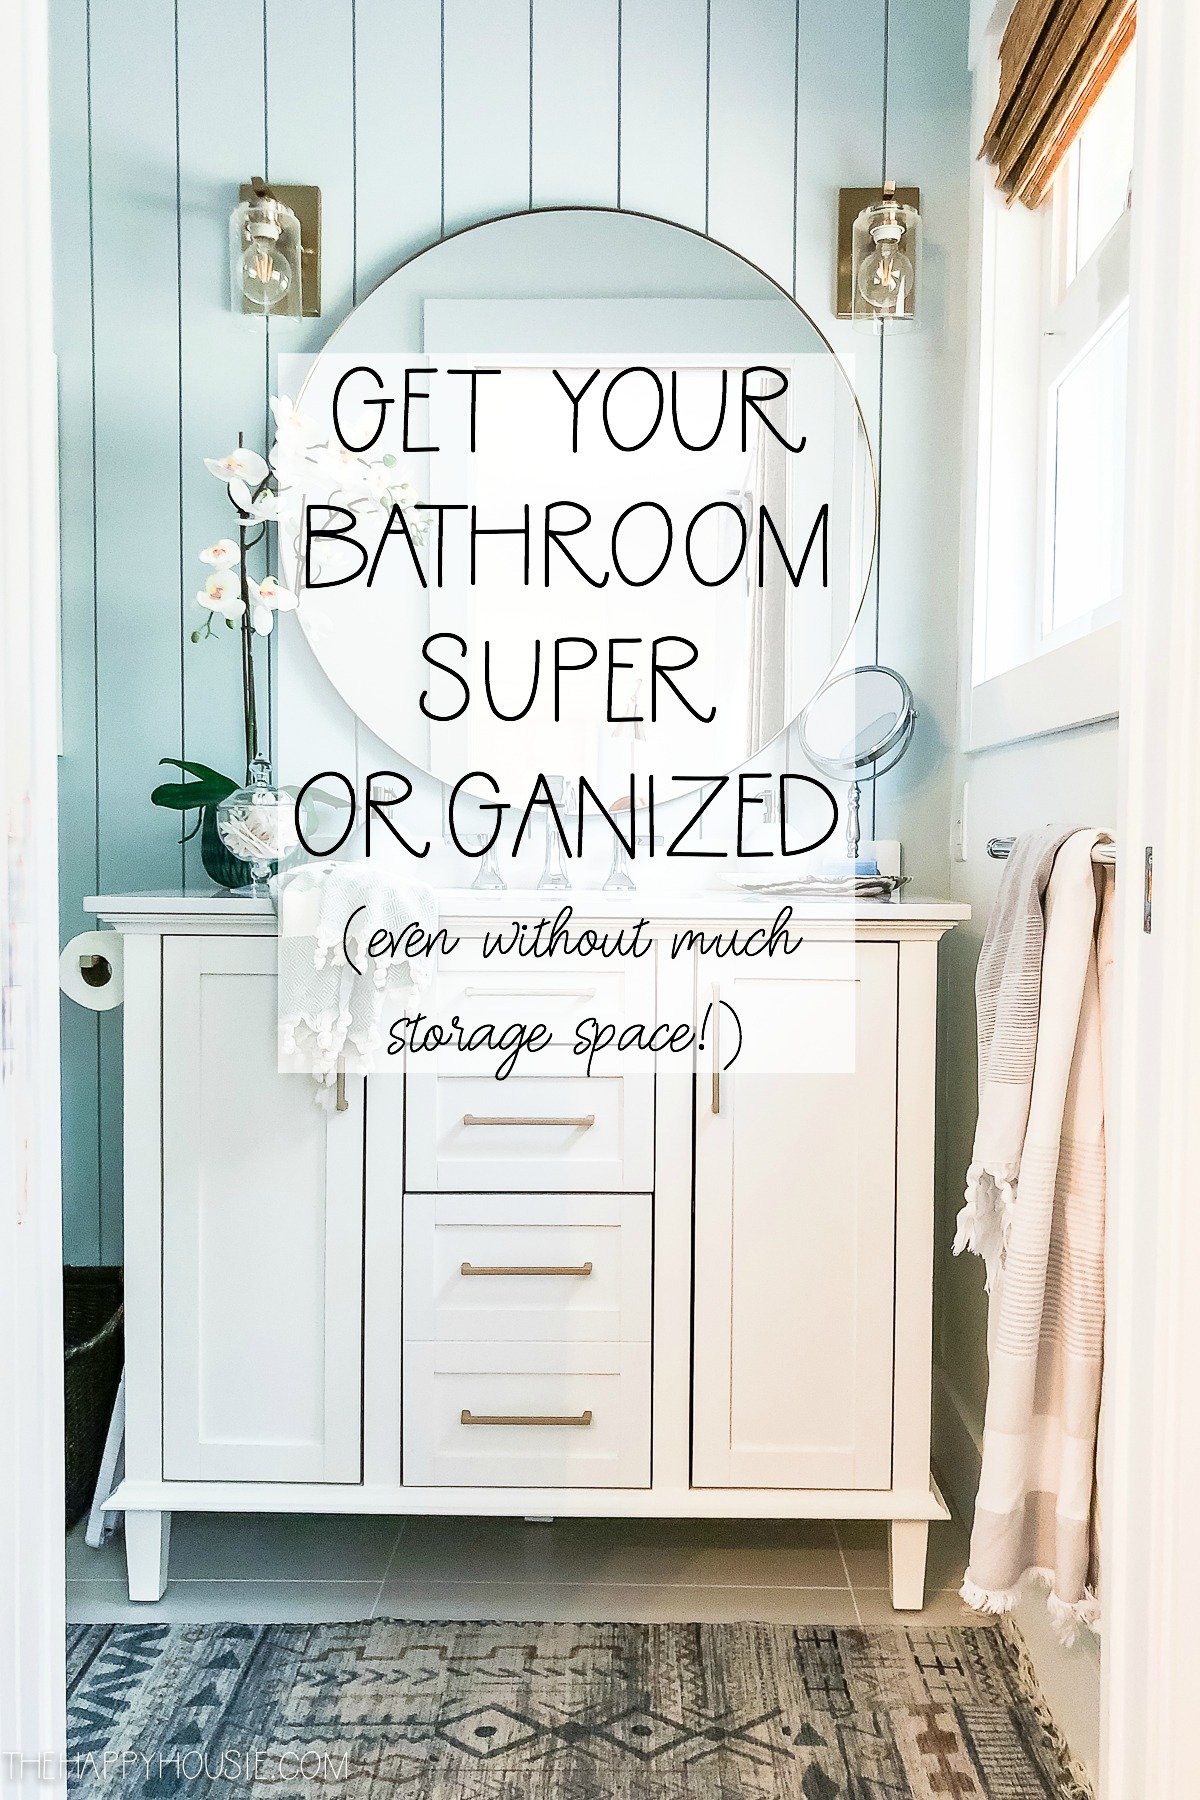 Get your bathroom Super organized poster.